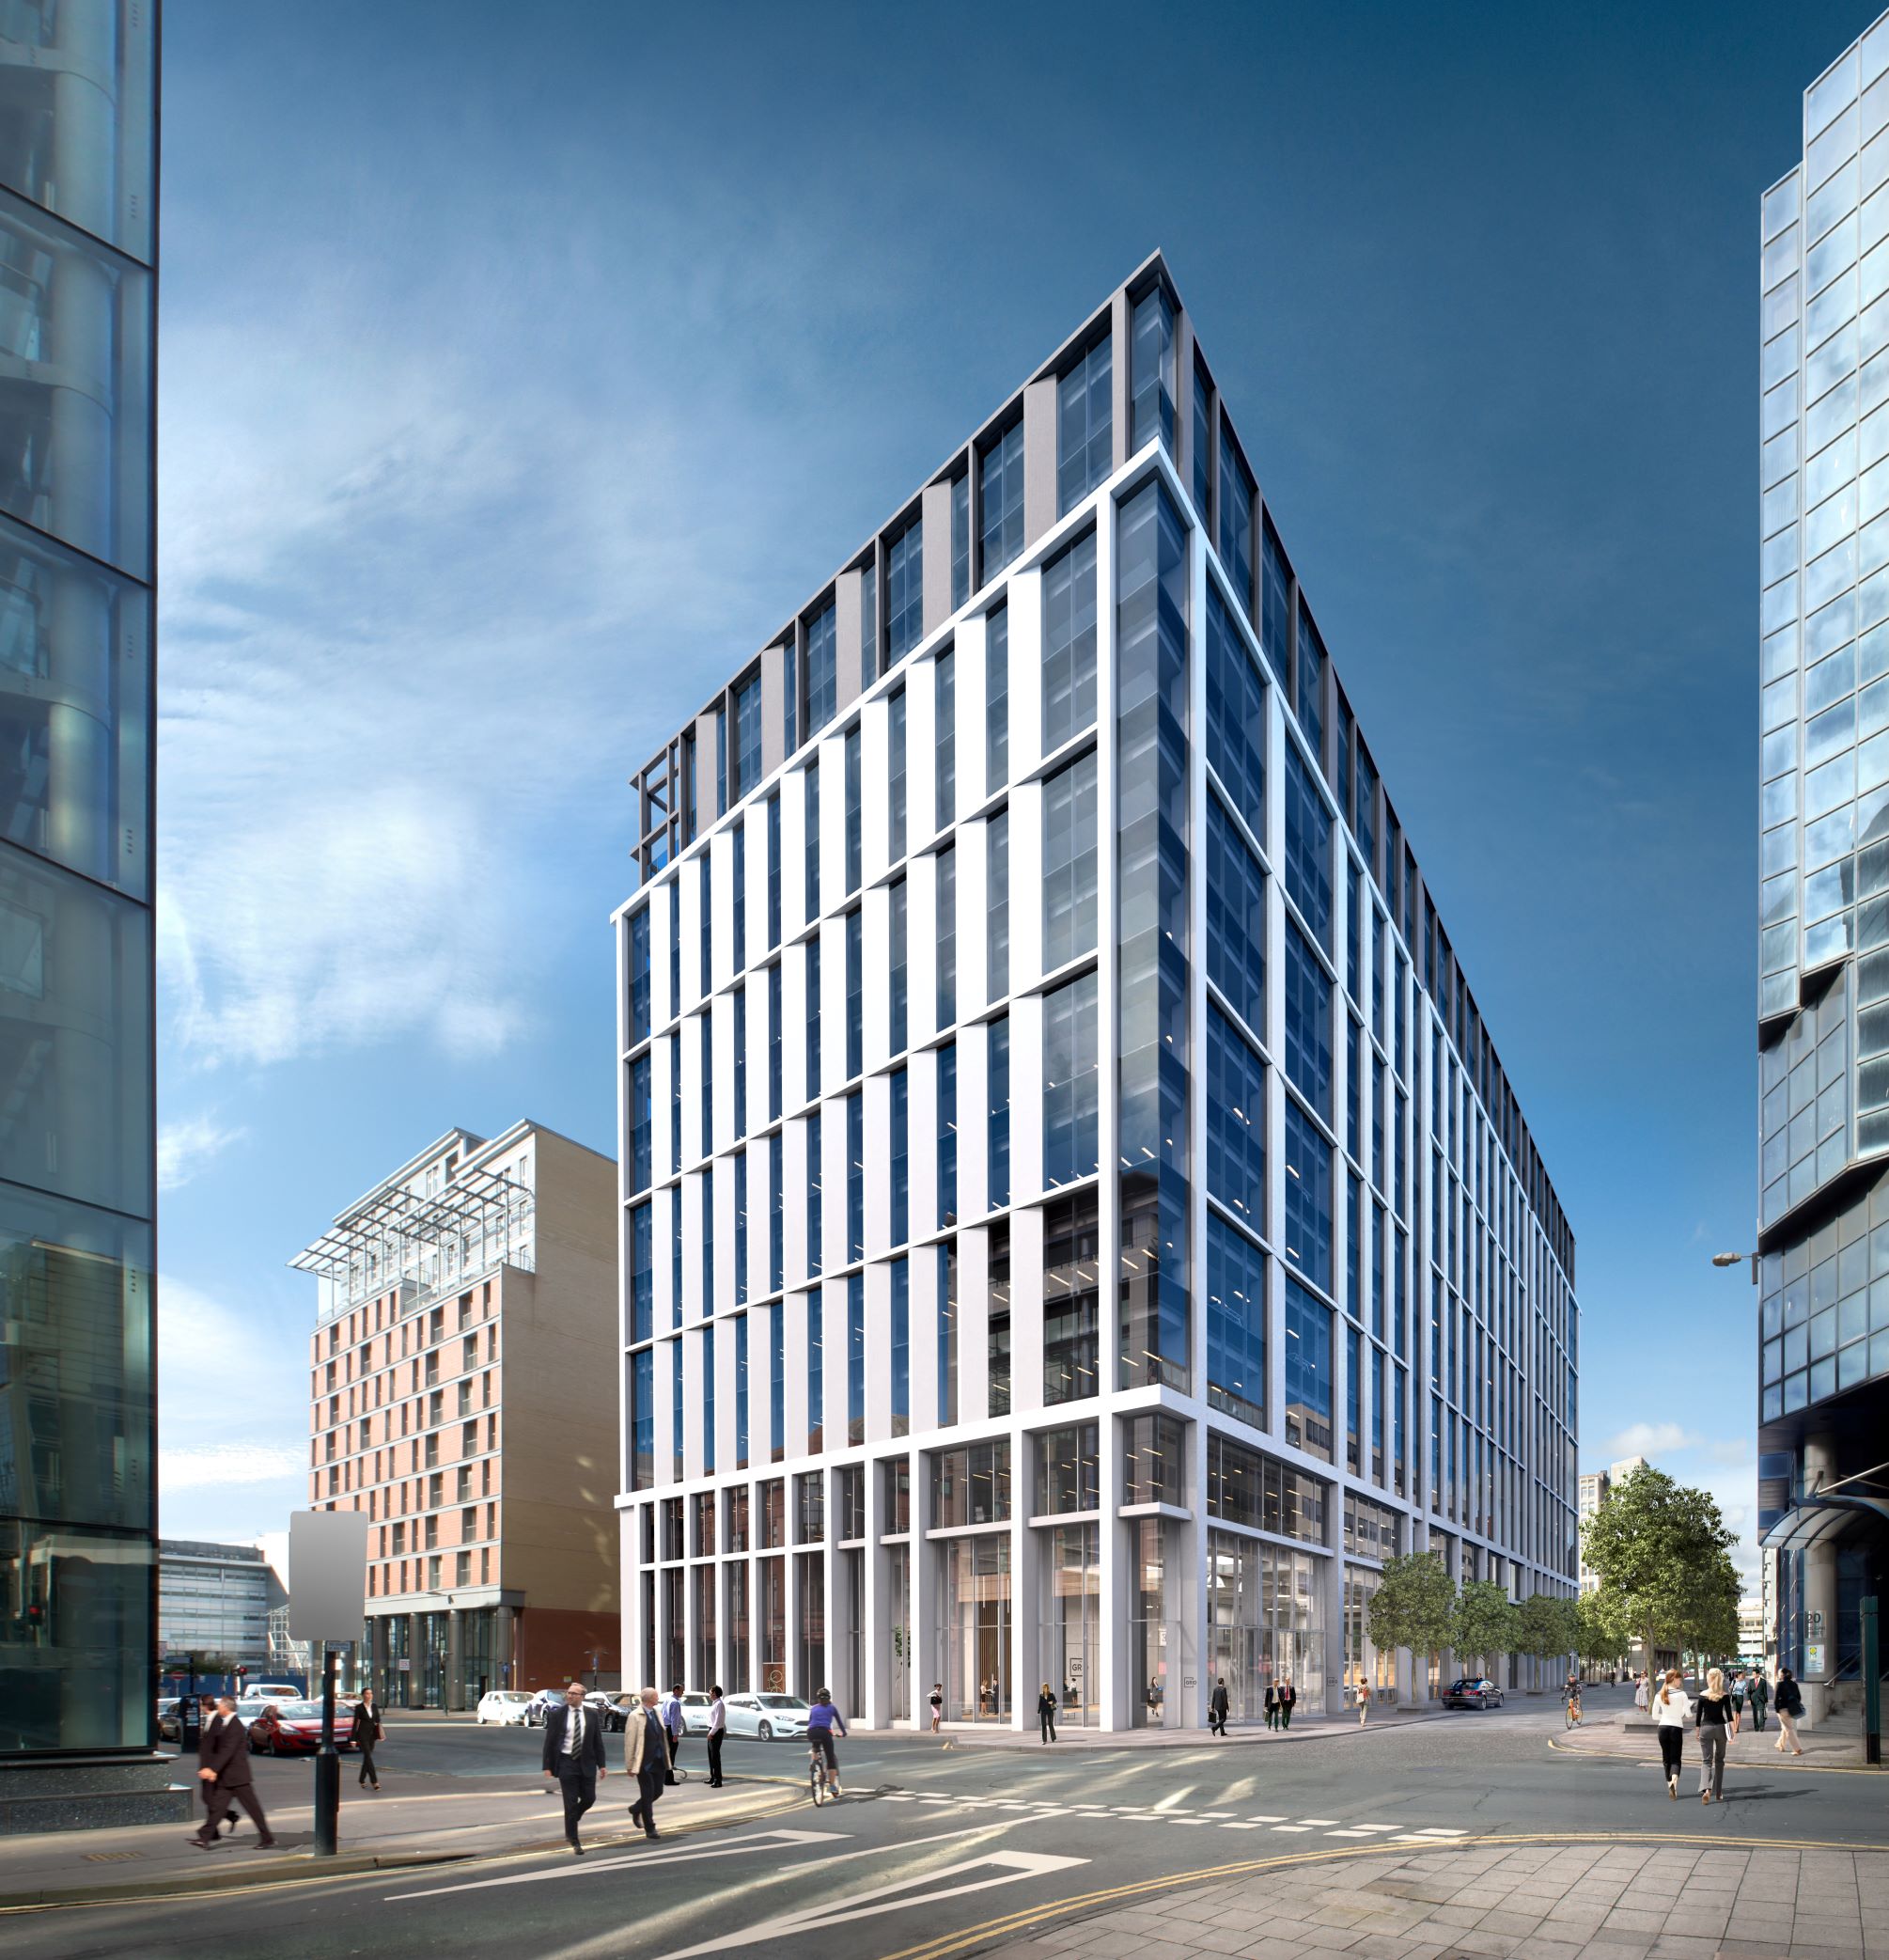 Cadogan Street development site acquired to deliver 275,000 sq ft of workspace